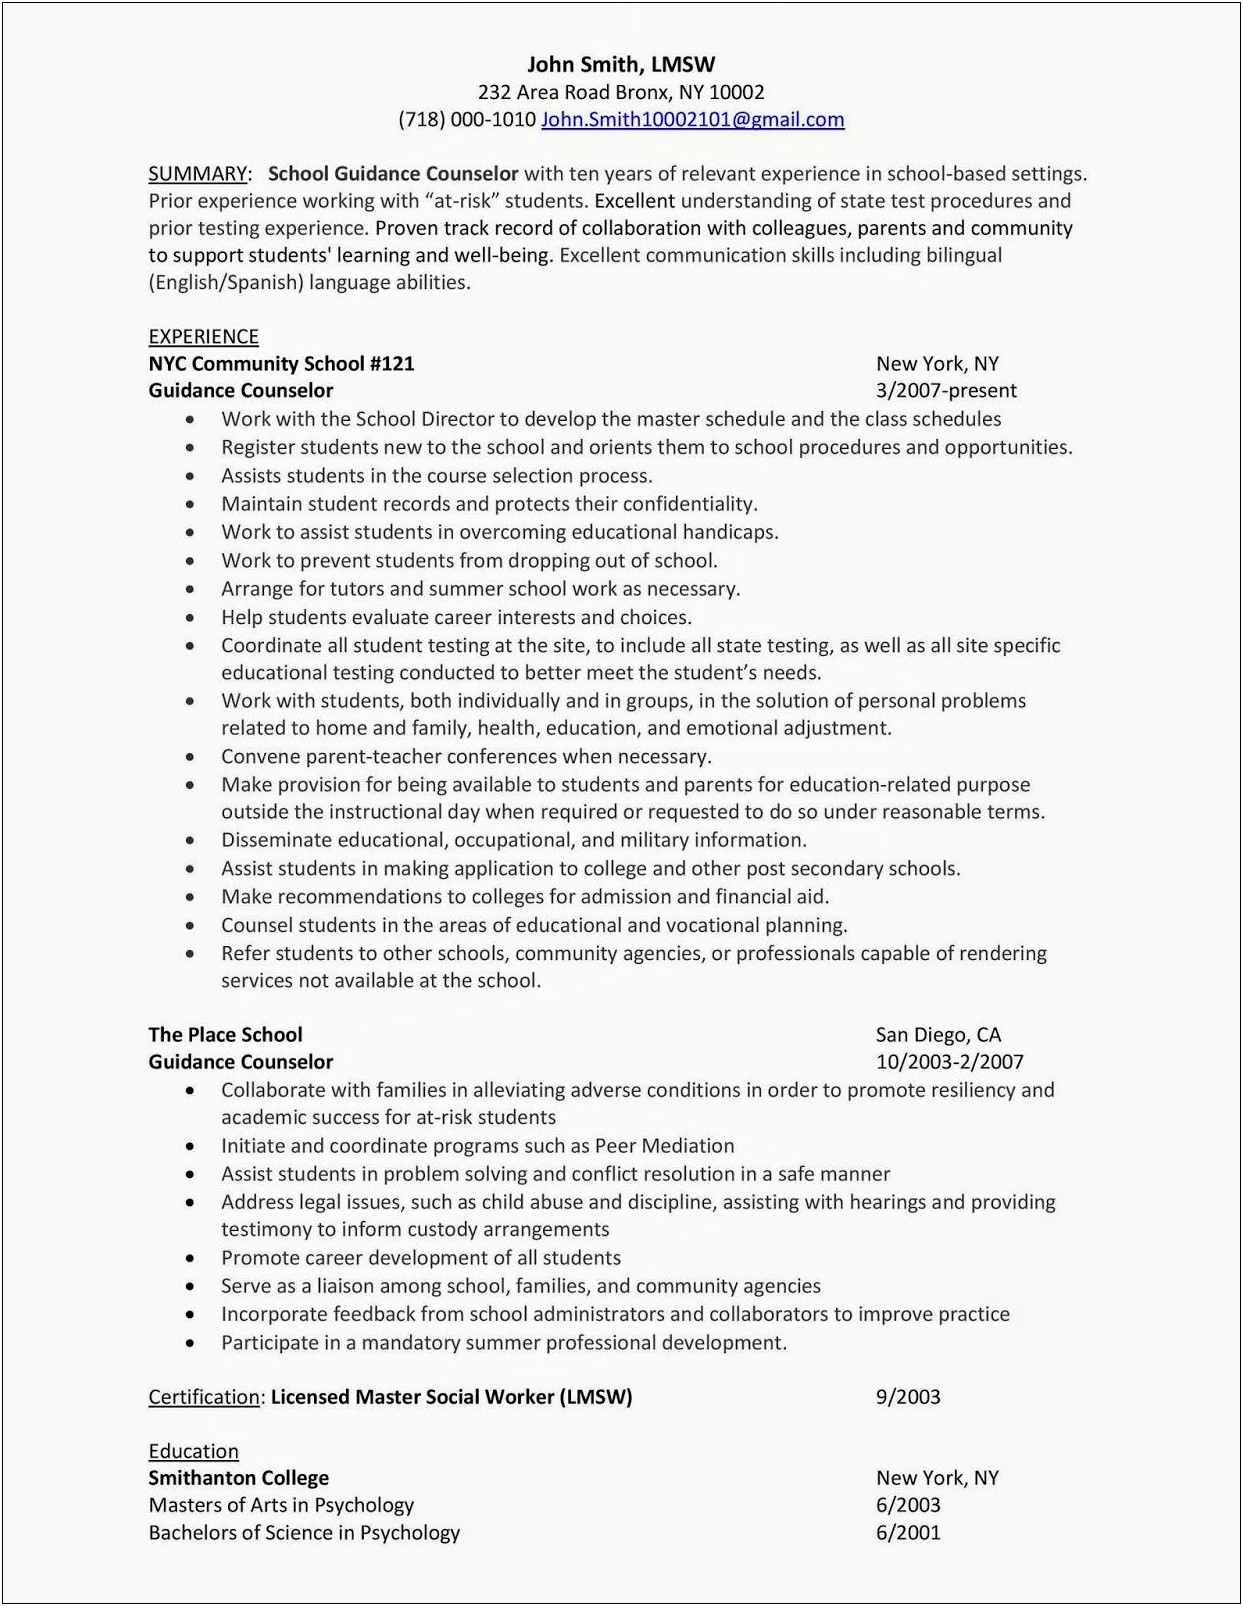 Impressive Resume For Guidance Counselor Jobs